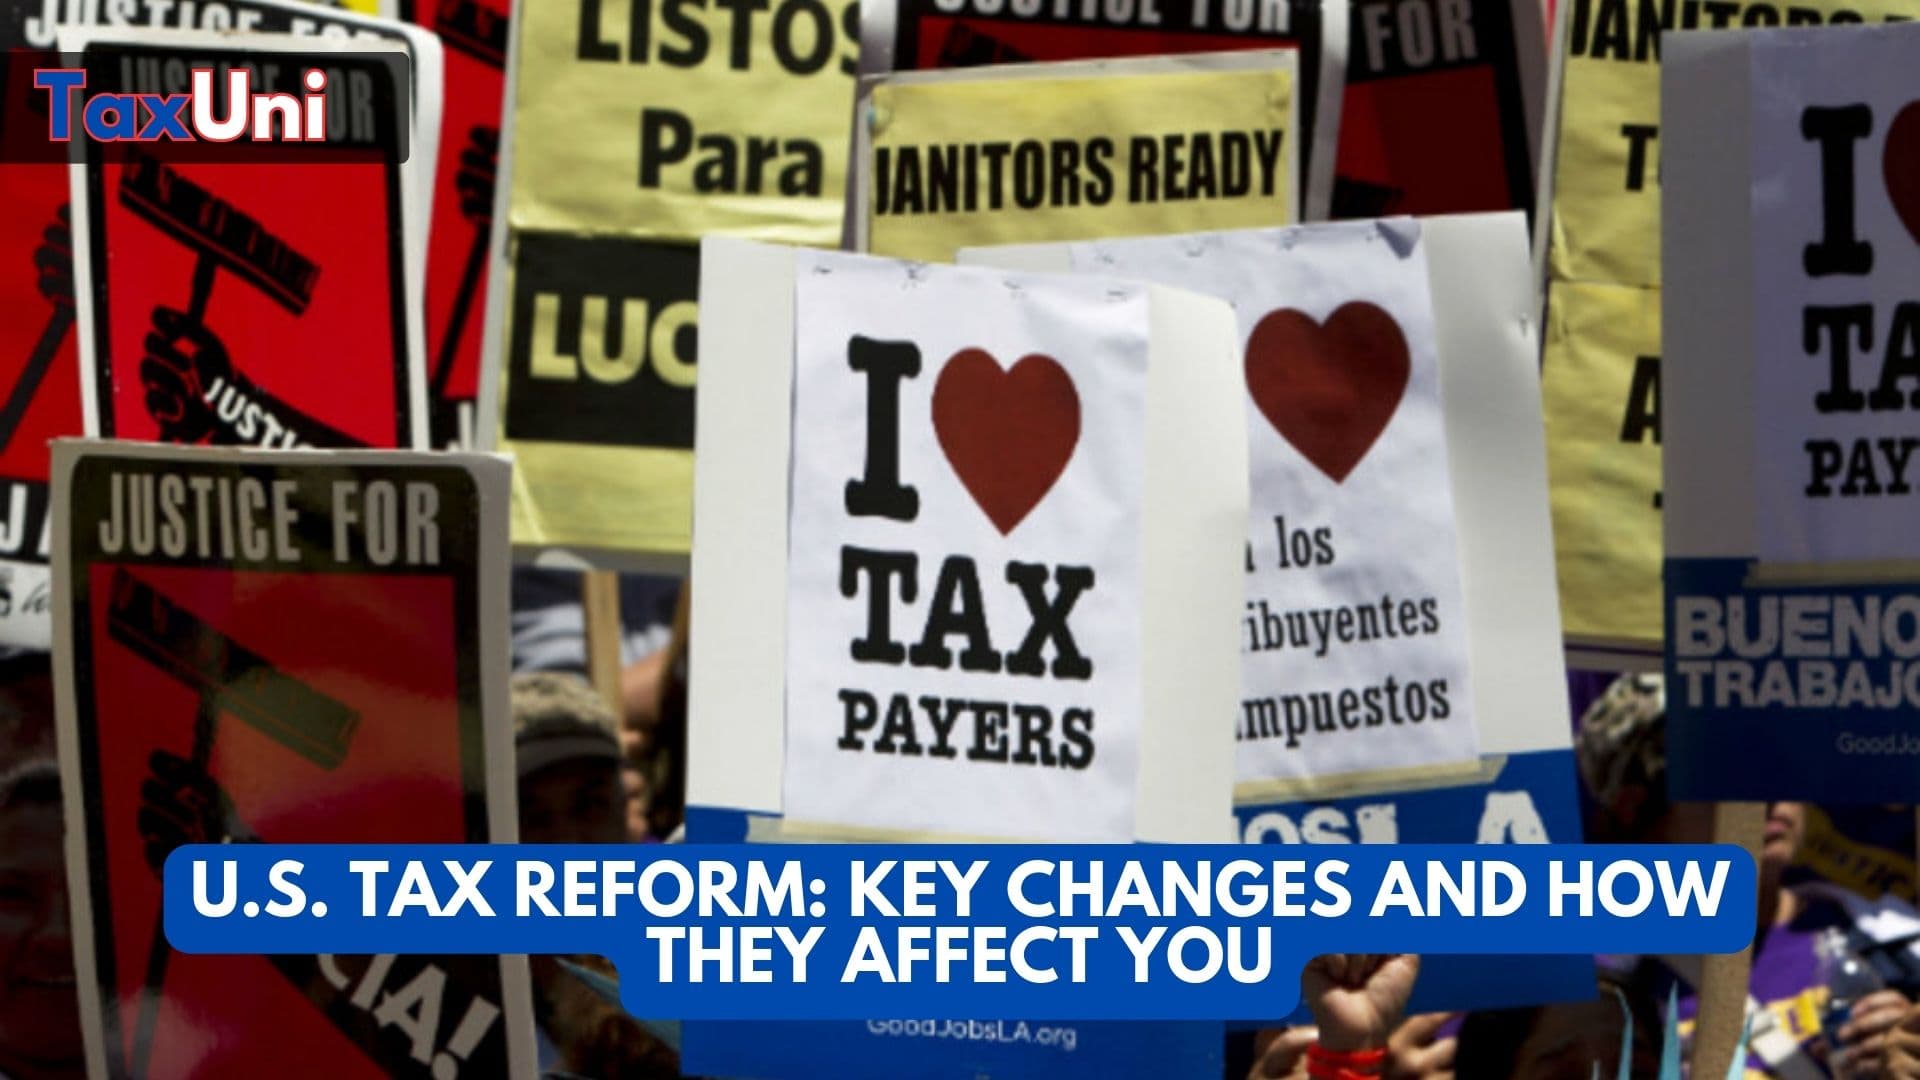 U.S. Tax Reform: Key Changes and How They Affect You